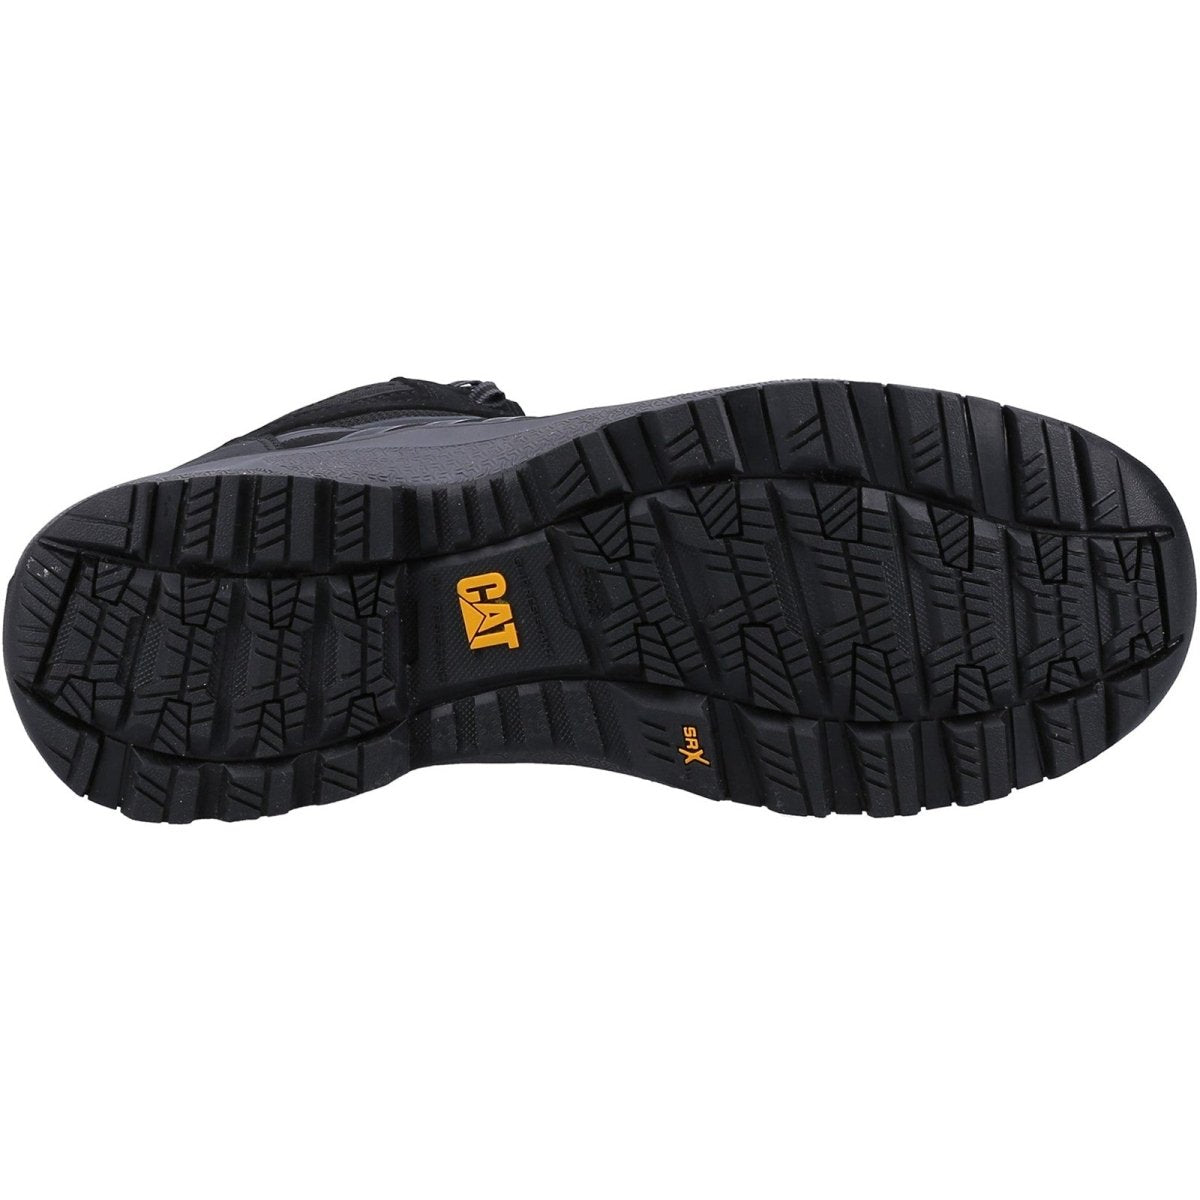 Caterpillar Charge Mid S3 Composite Toe Safety Hiker Boots - Shoe Store Direct